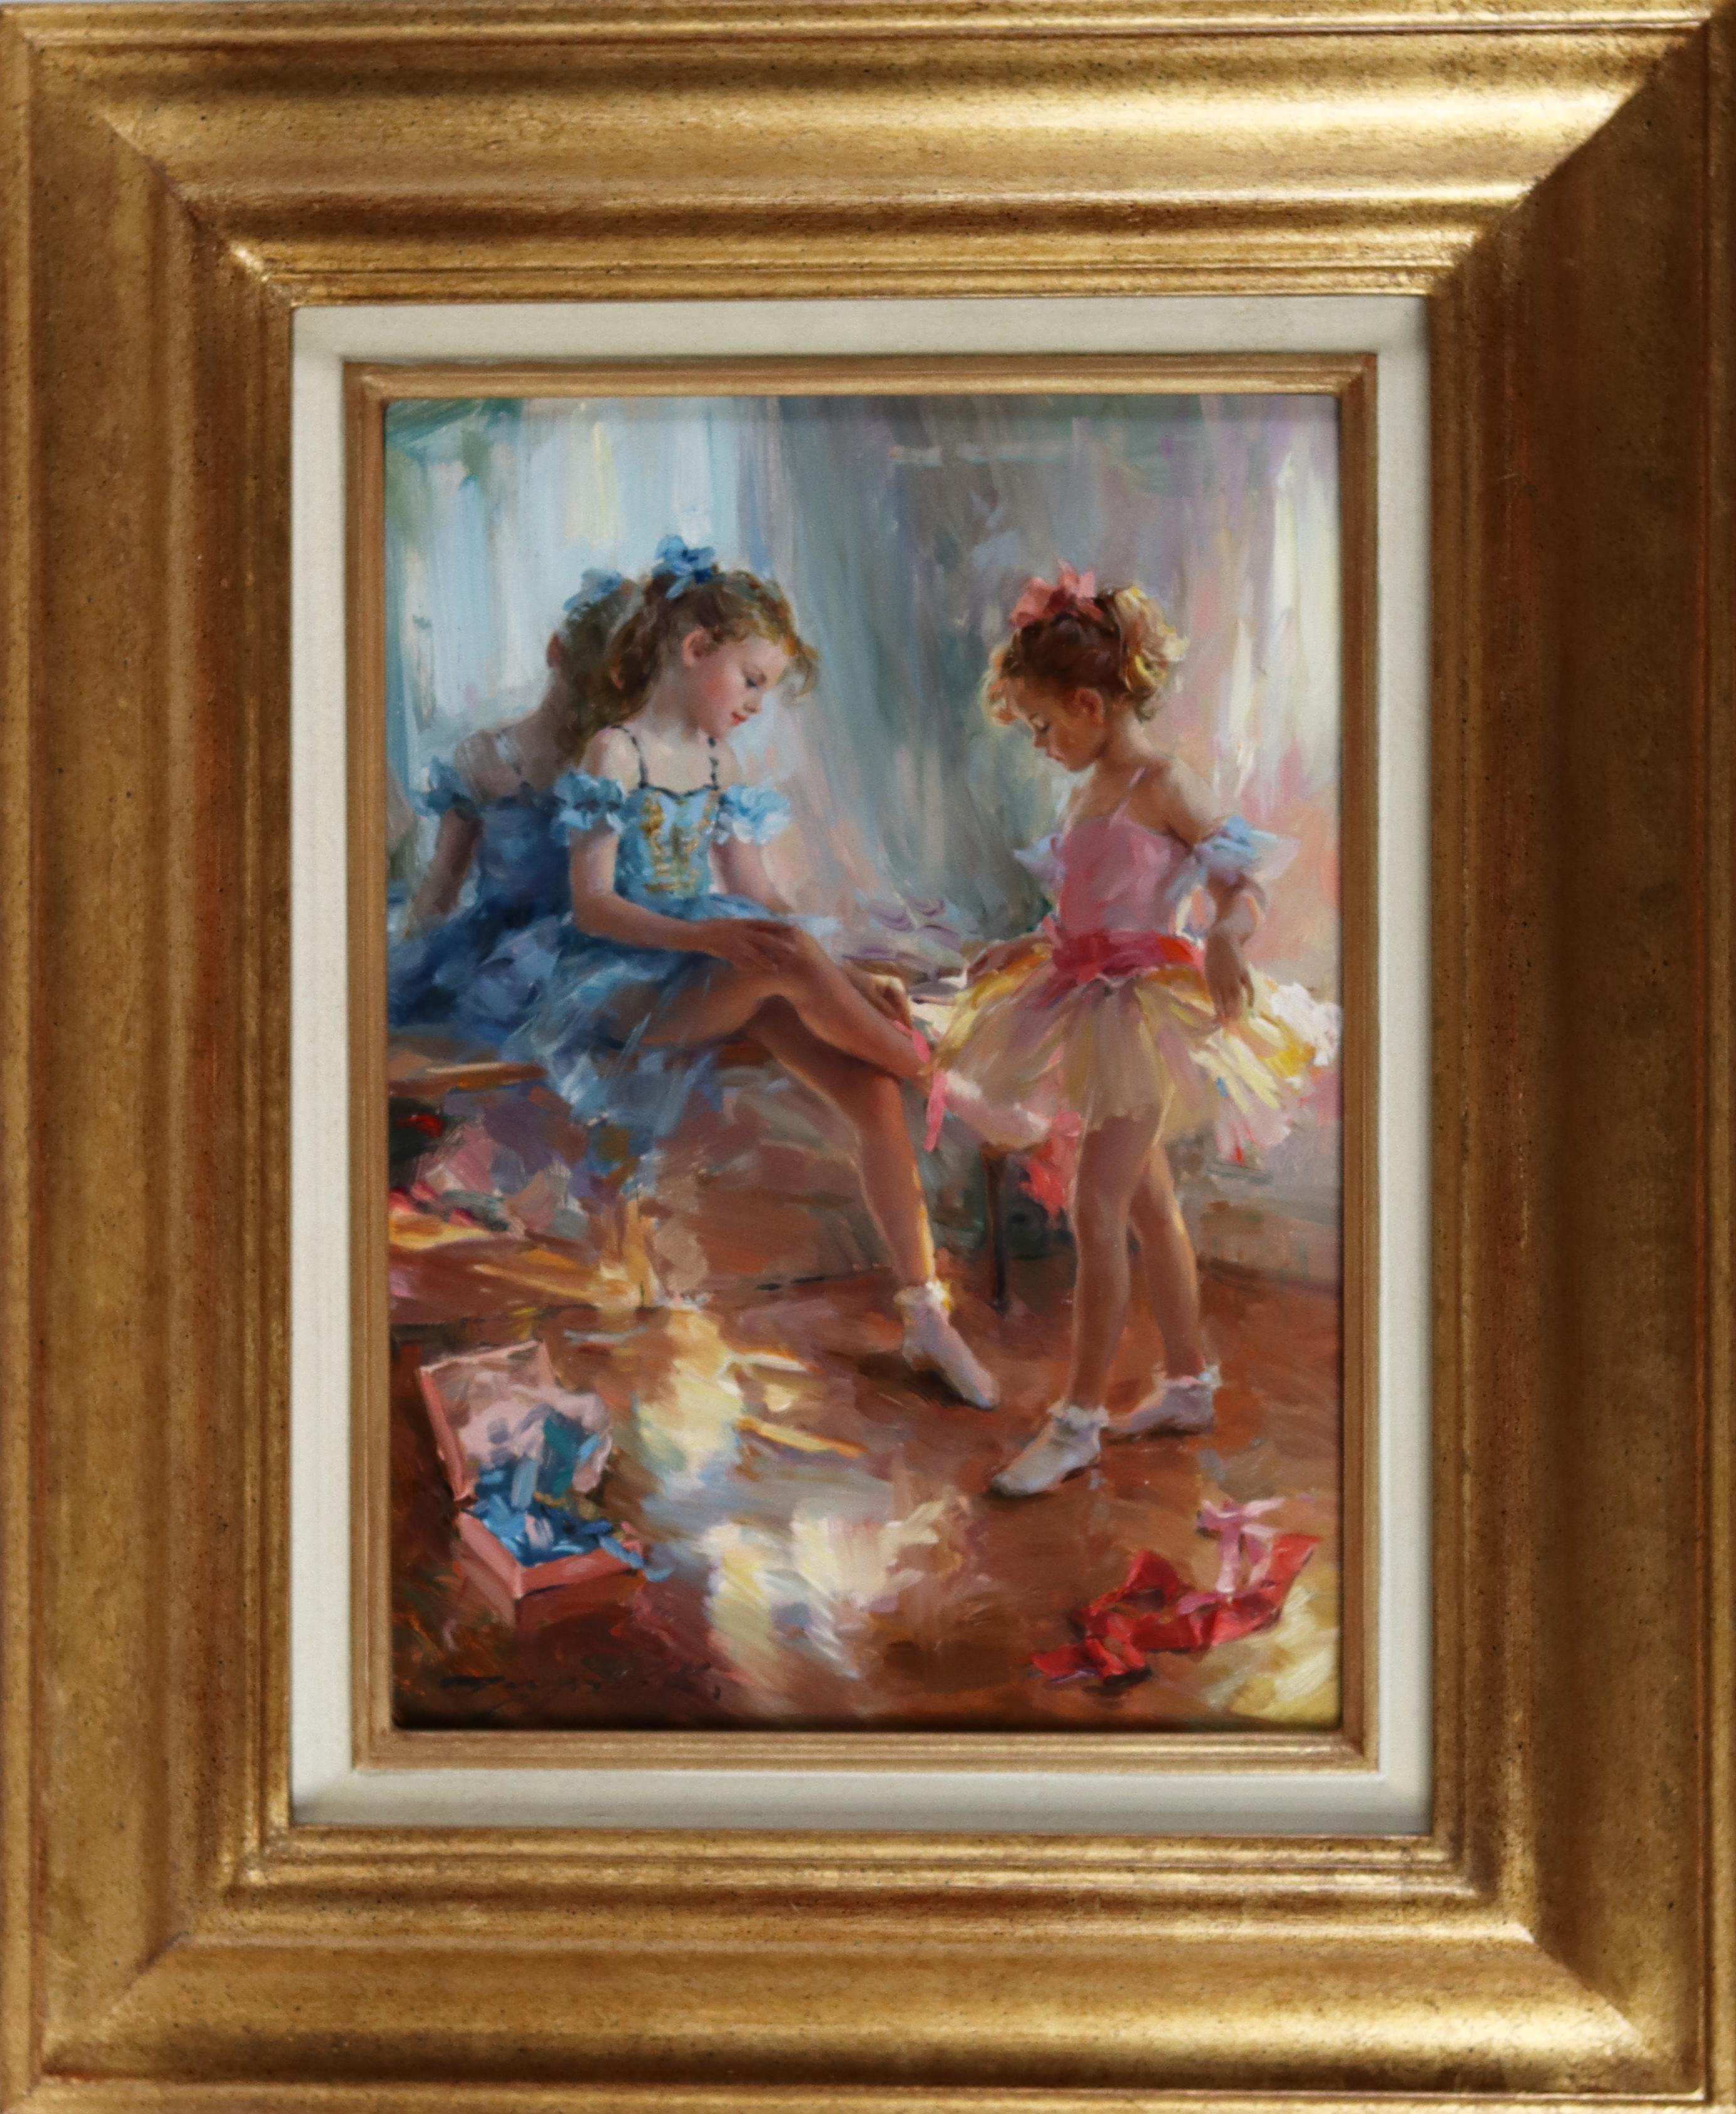 Young Girls waiting for a Ballet Performance - Painting by Konstantin Razumov 